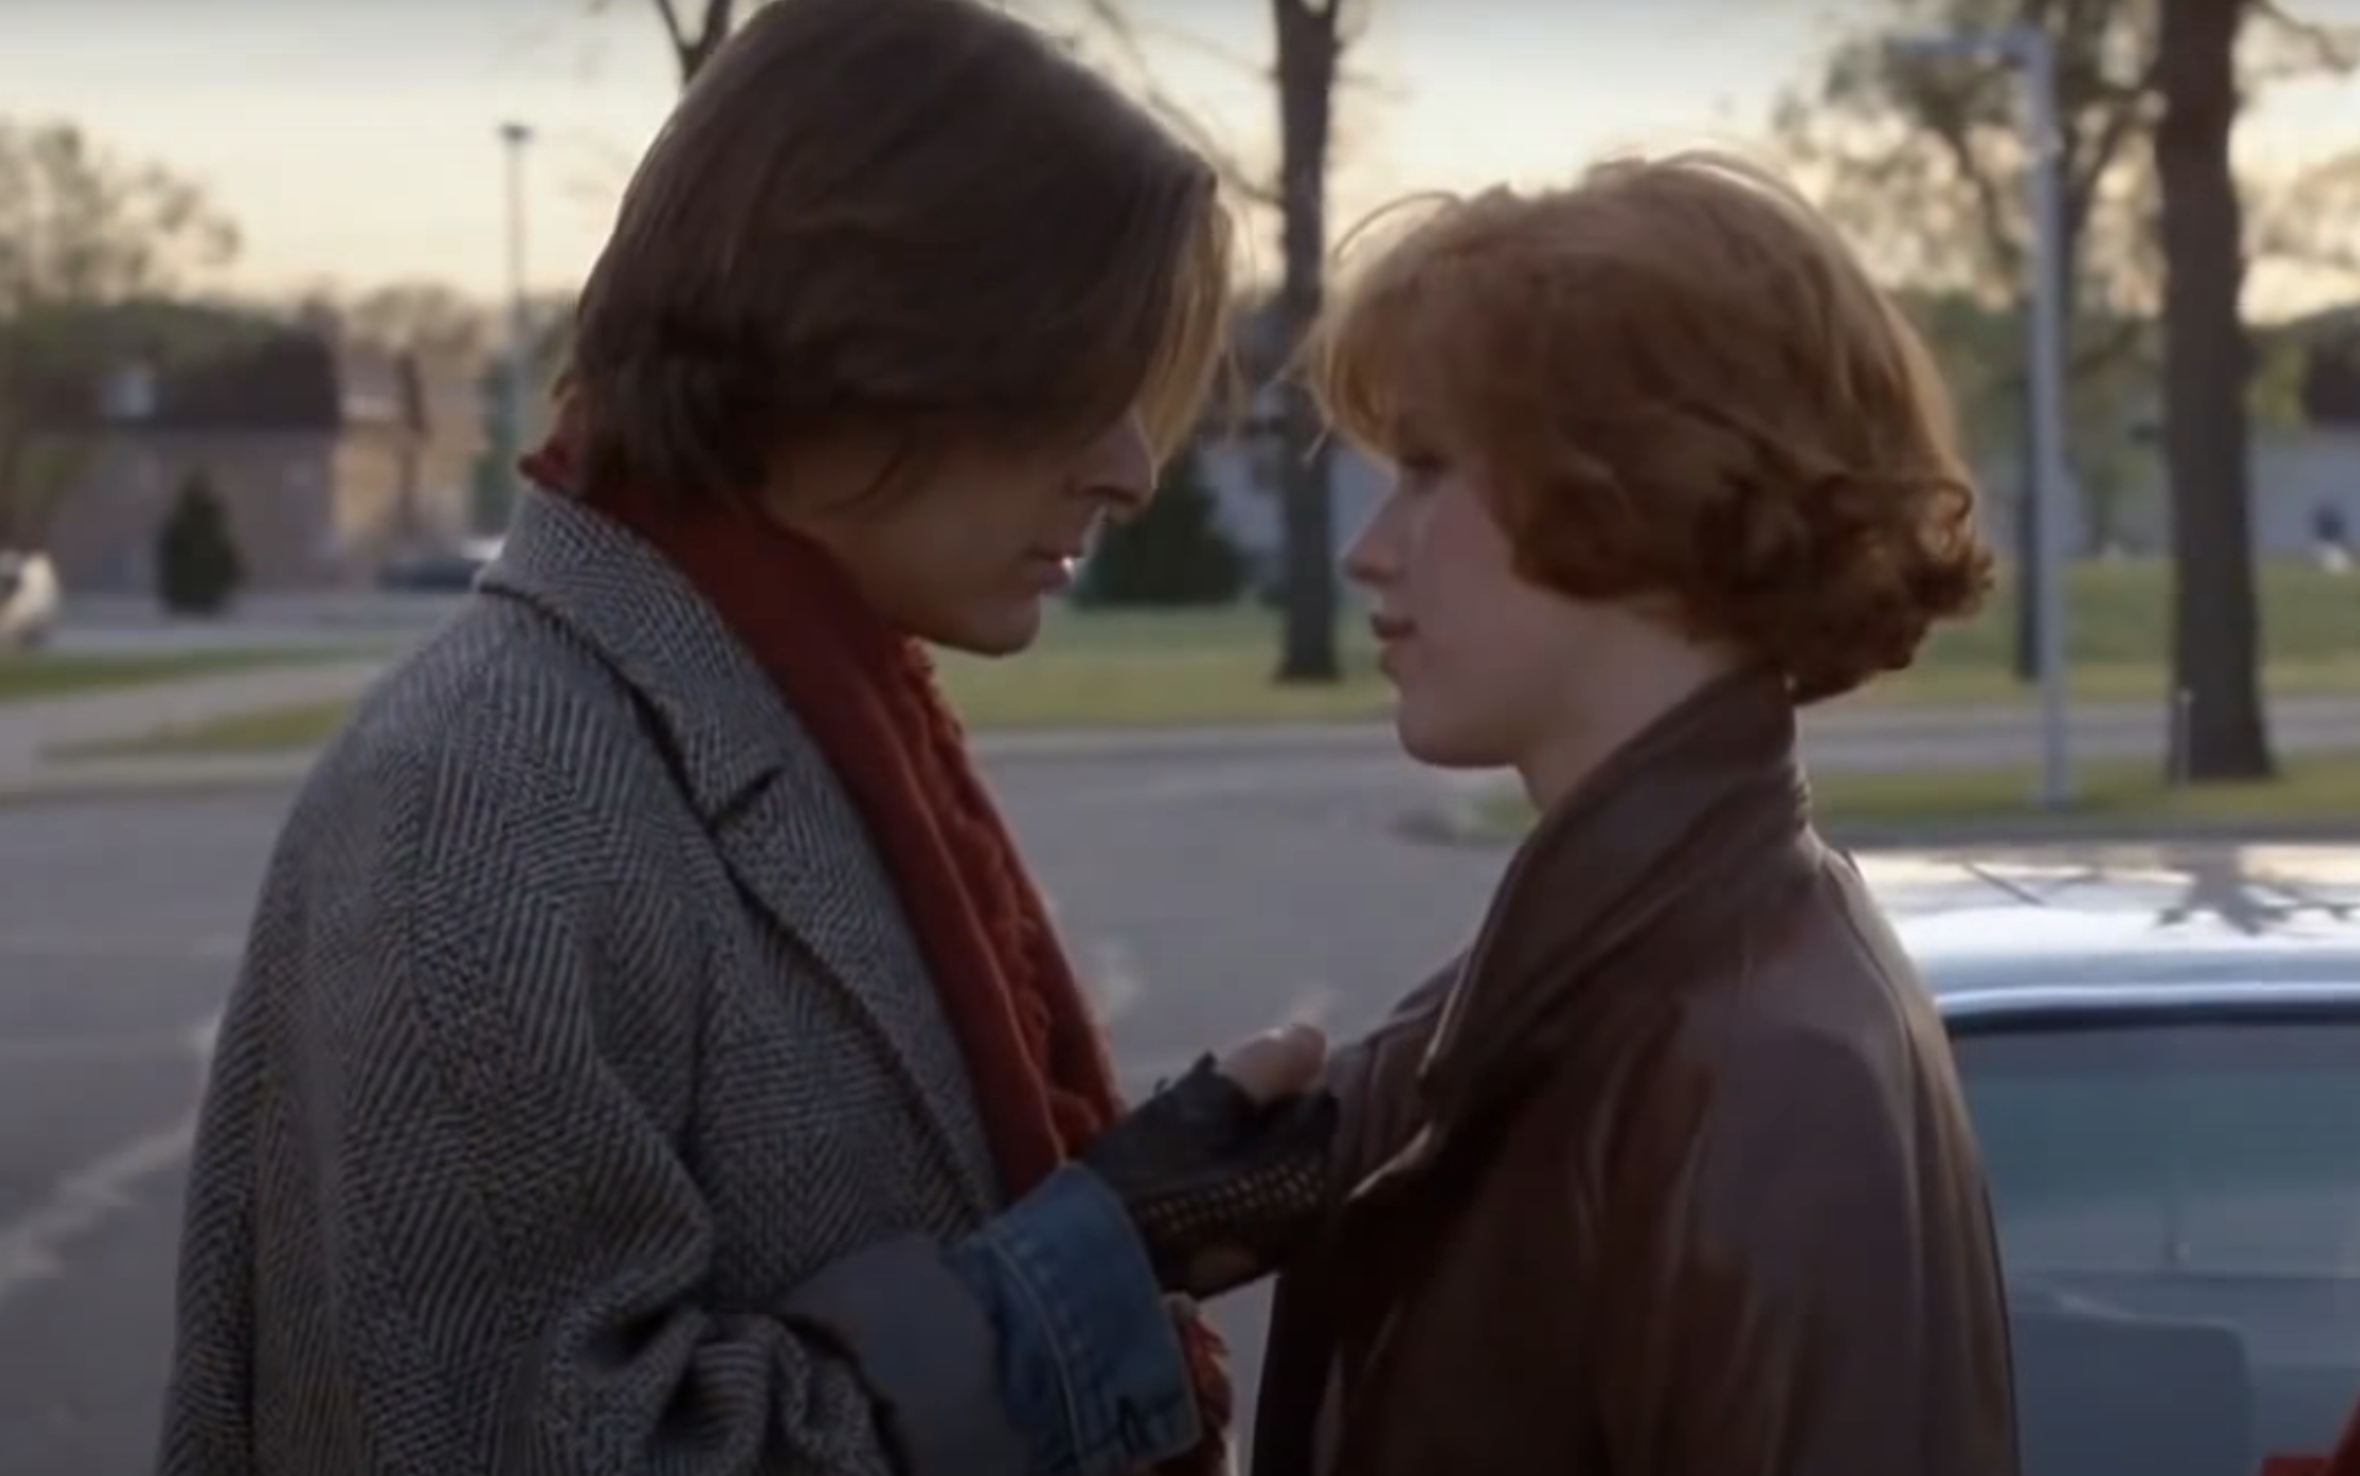 Two characters from the movie Breakfast Club, John Bender and Claire Standish, face each other outdoors